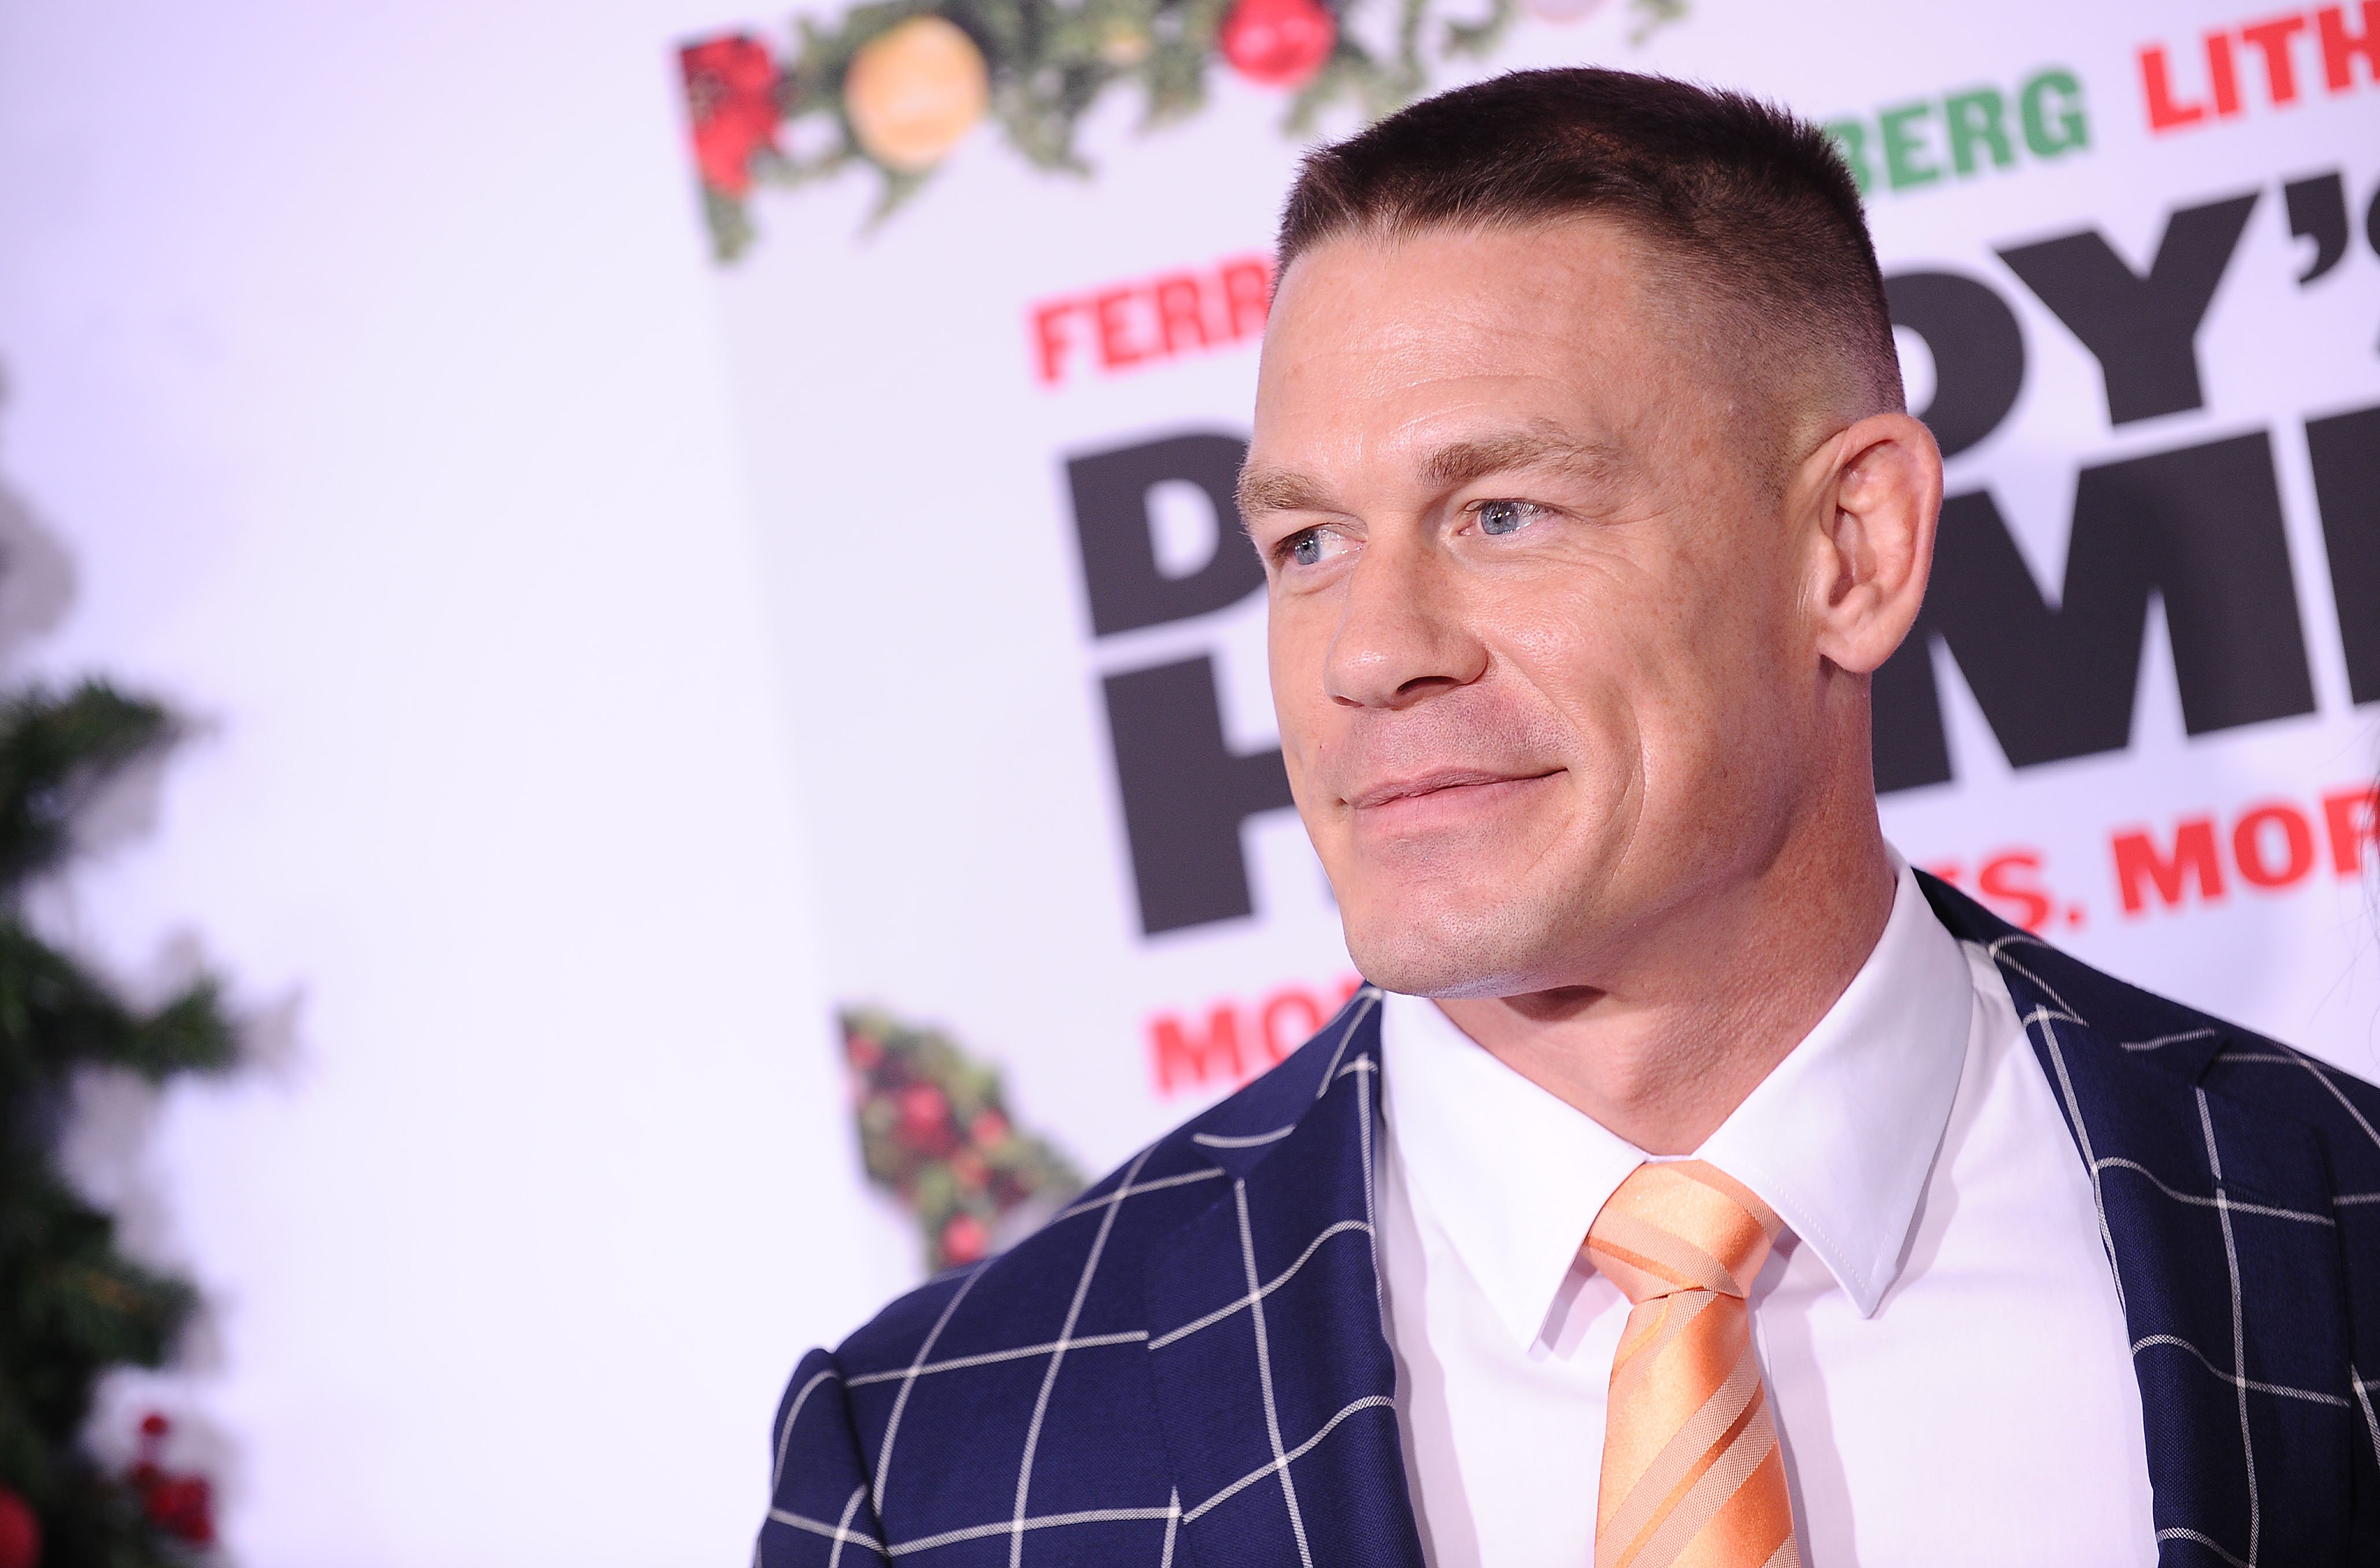 New Details On John Cena’s ‘Ninja Turtles’ Character, Bayley Takes In The Emotional Royal Rumble Match (Video)